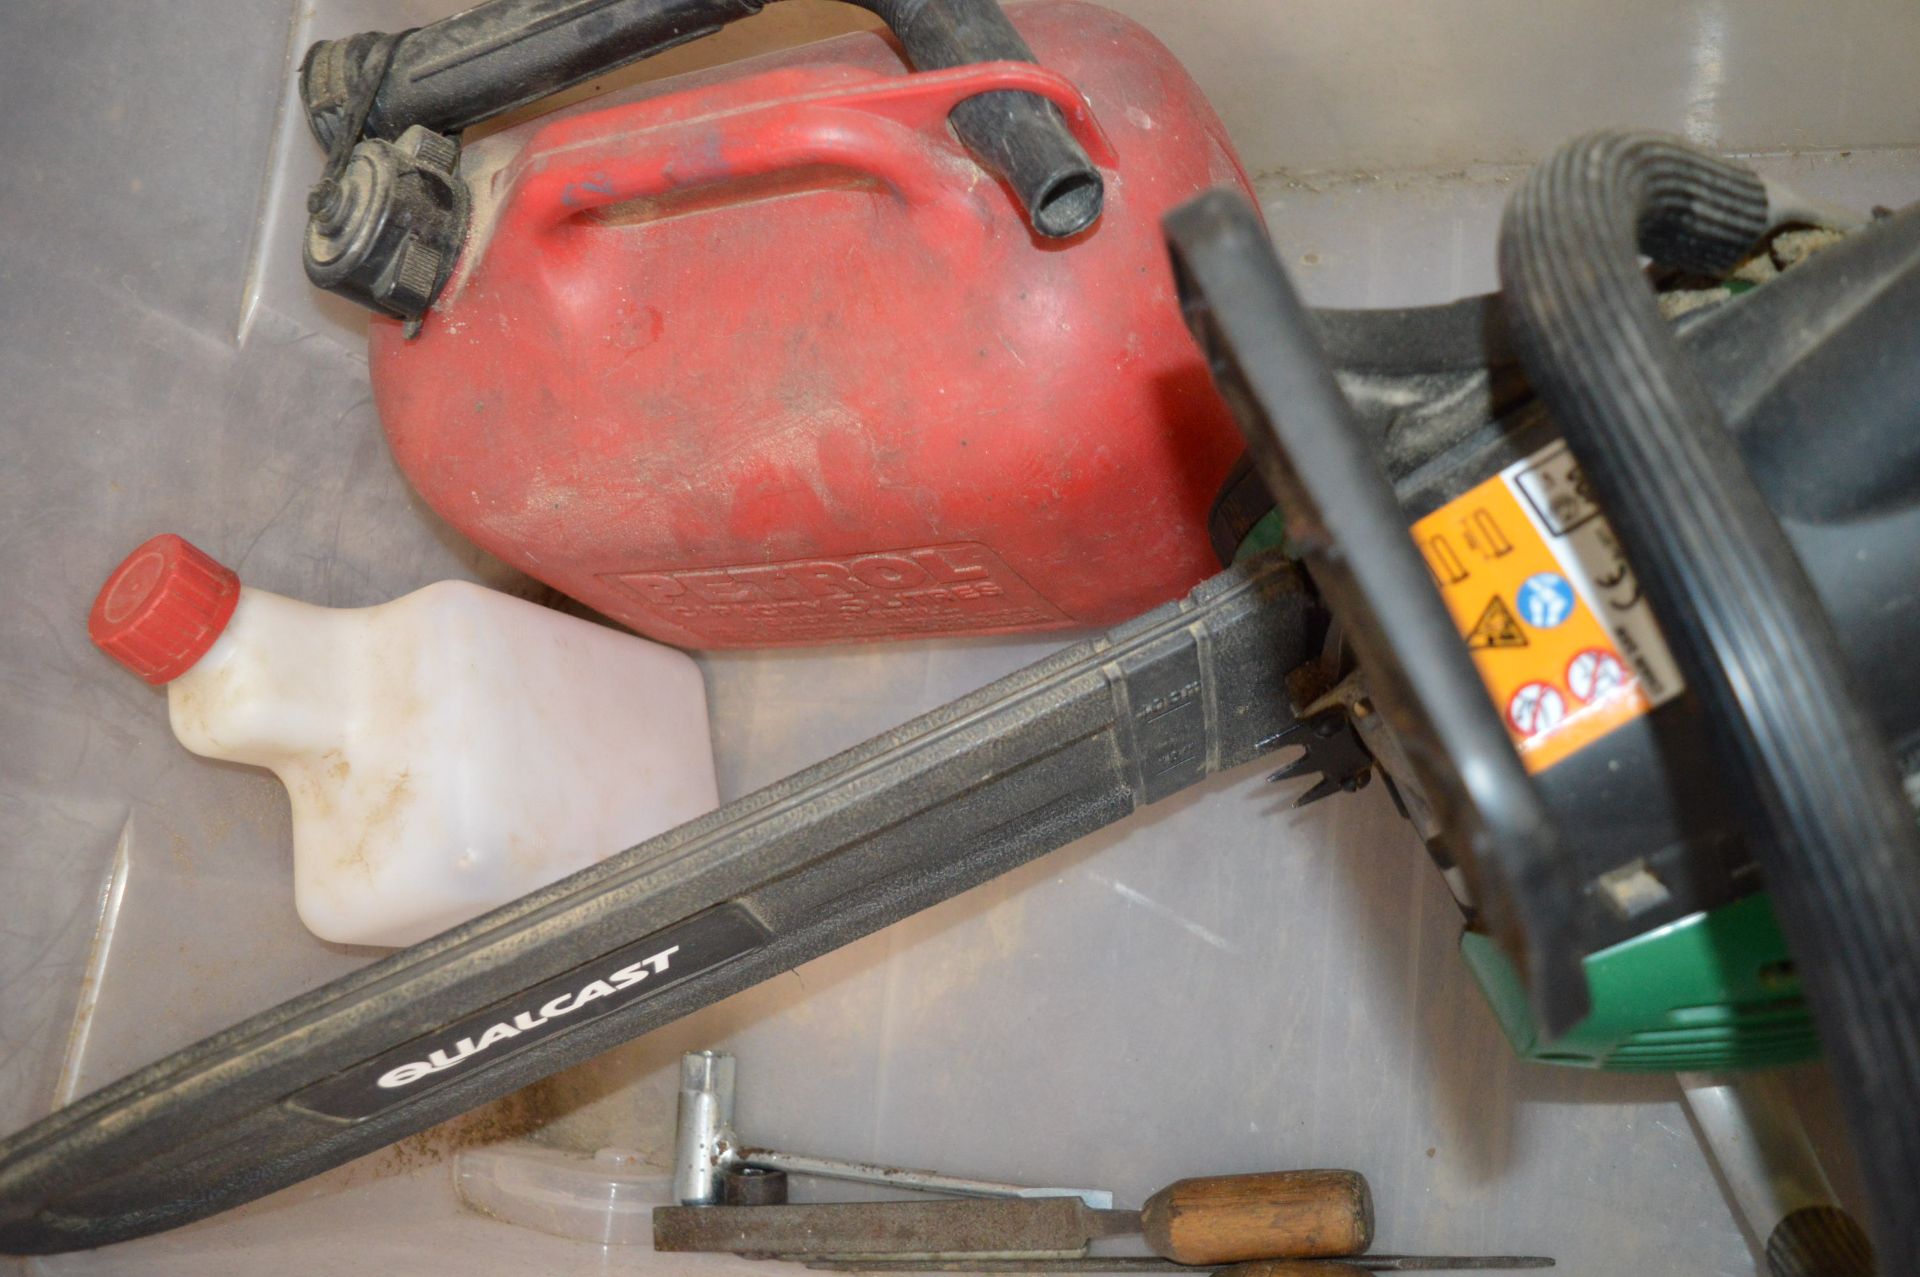 Qualcast PC40 Chainsaw - Image 3 of 3